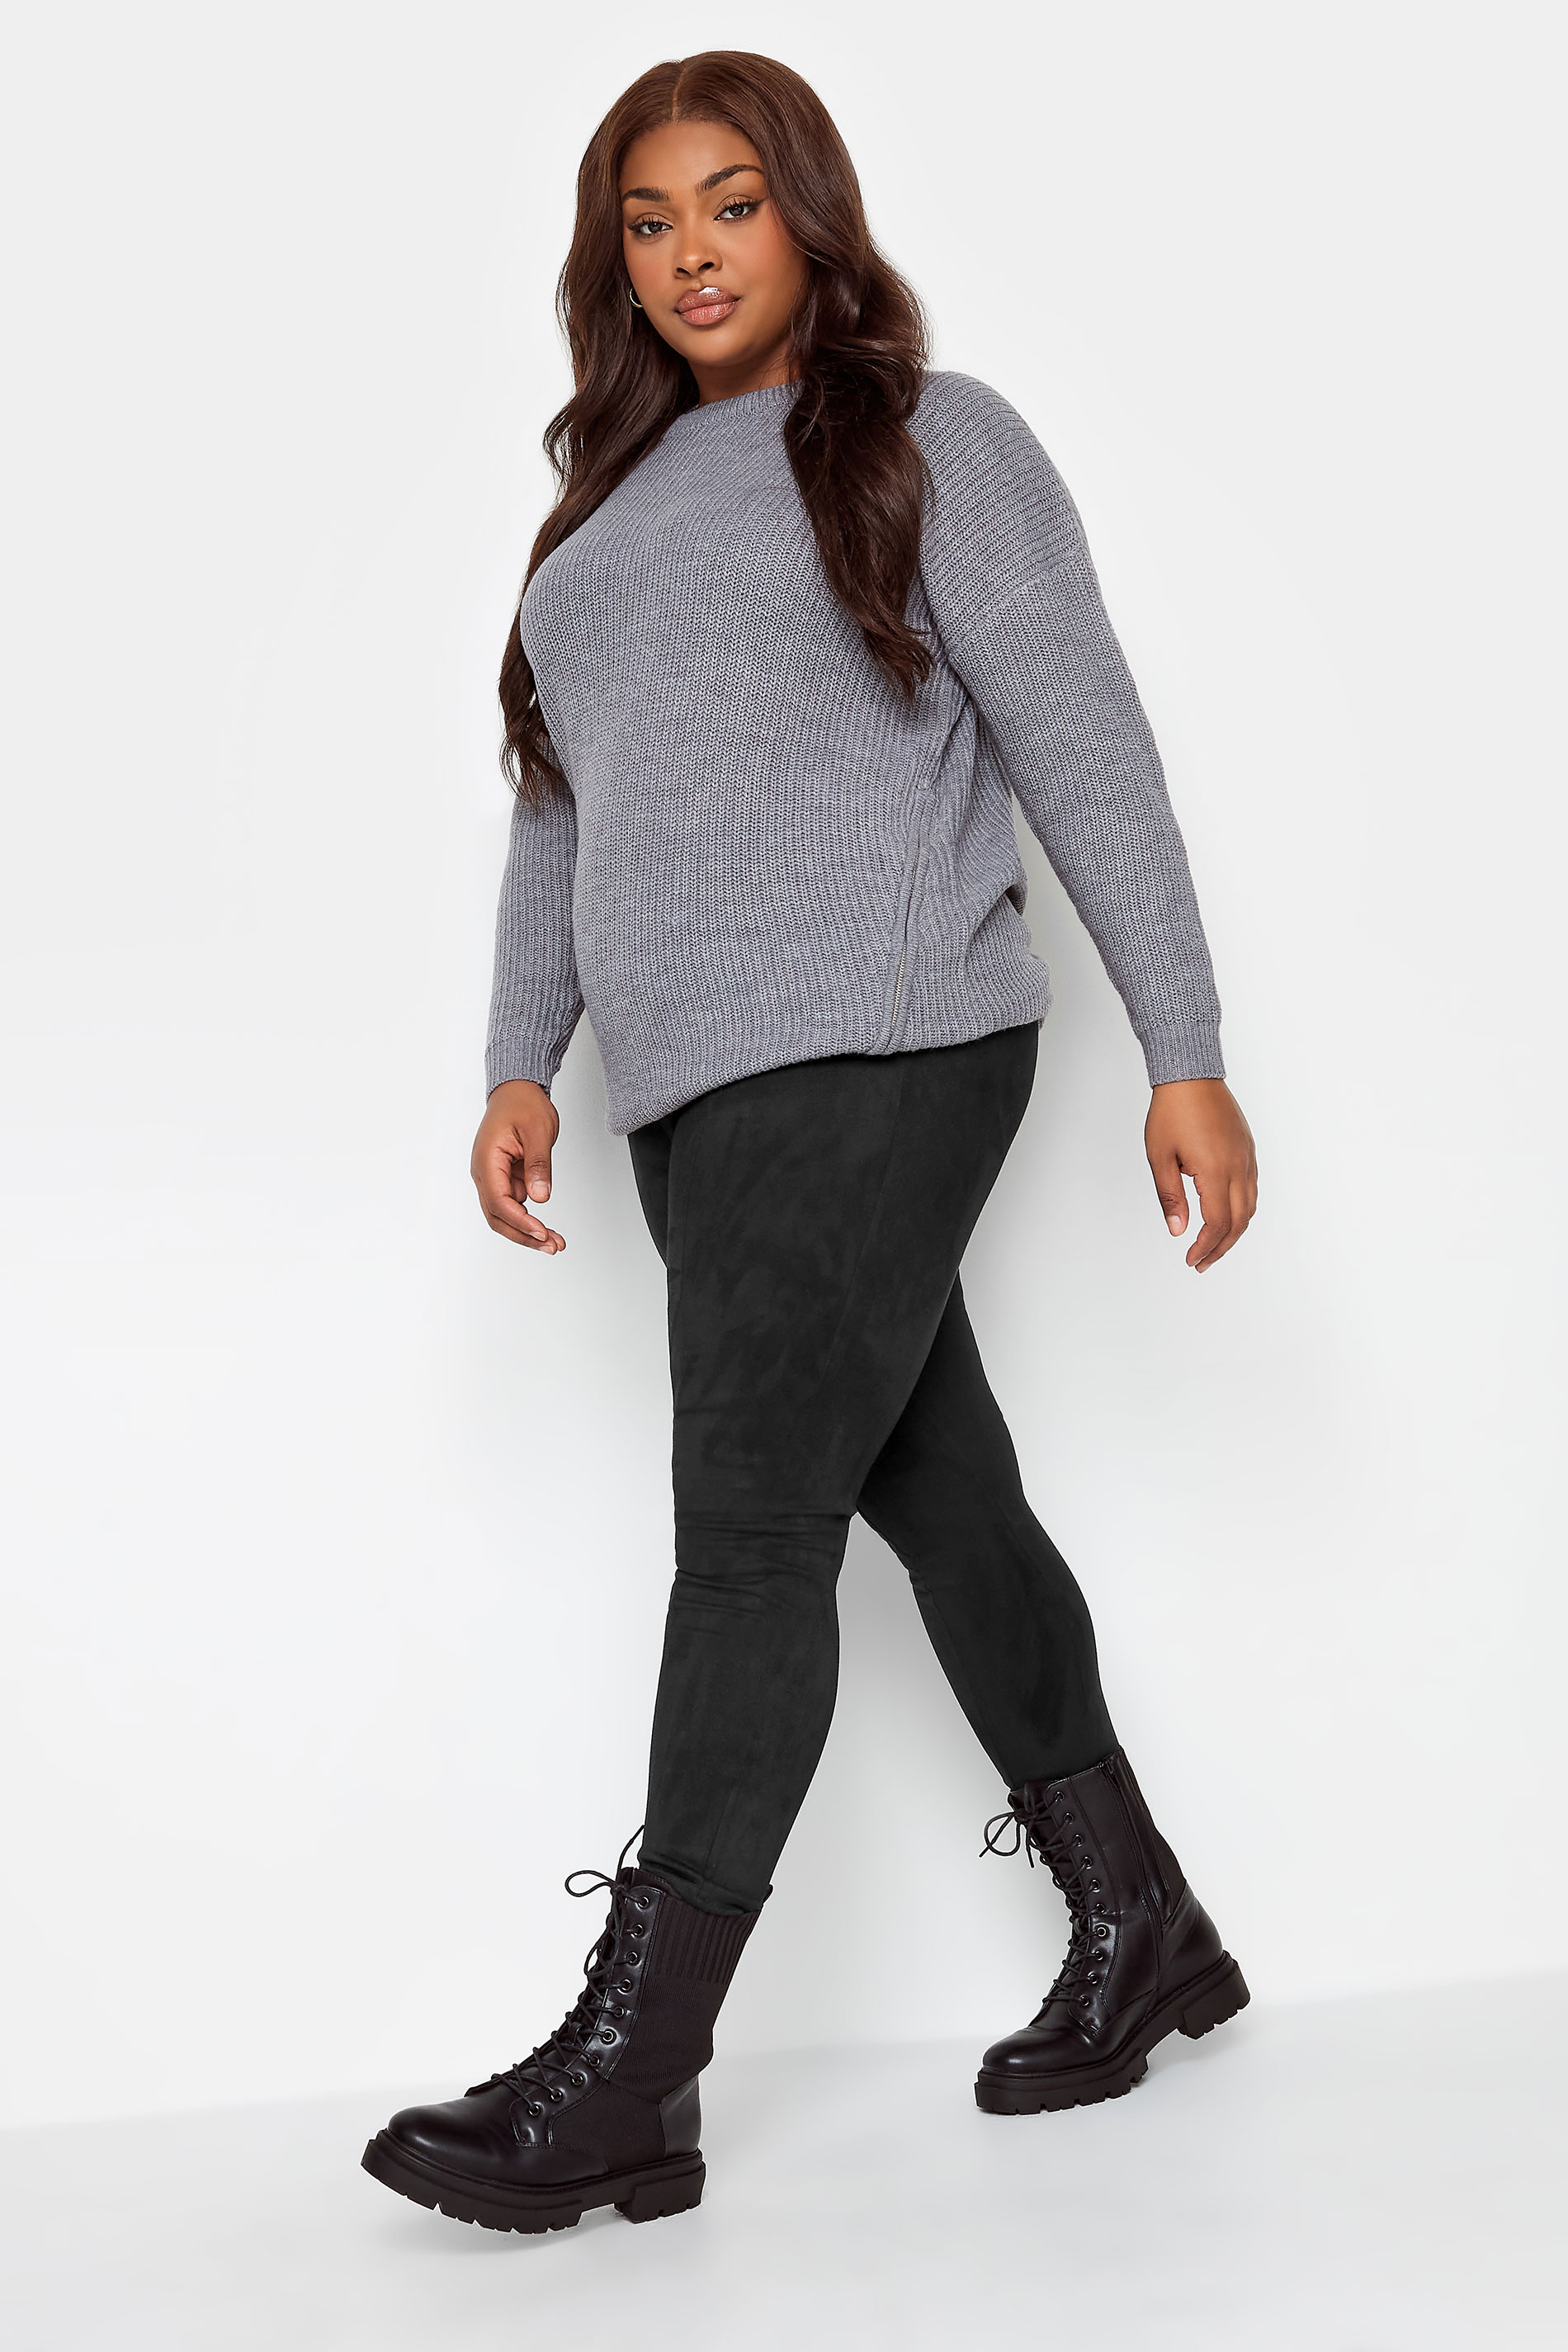 Plus Size Black Faux Suede Stretch High Waisted Leggings | Yours Clothing 2